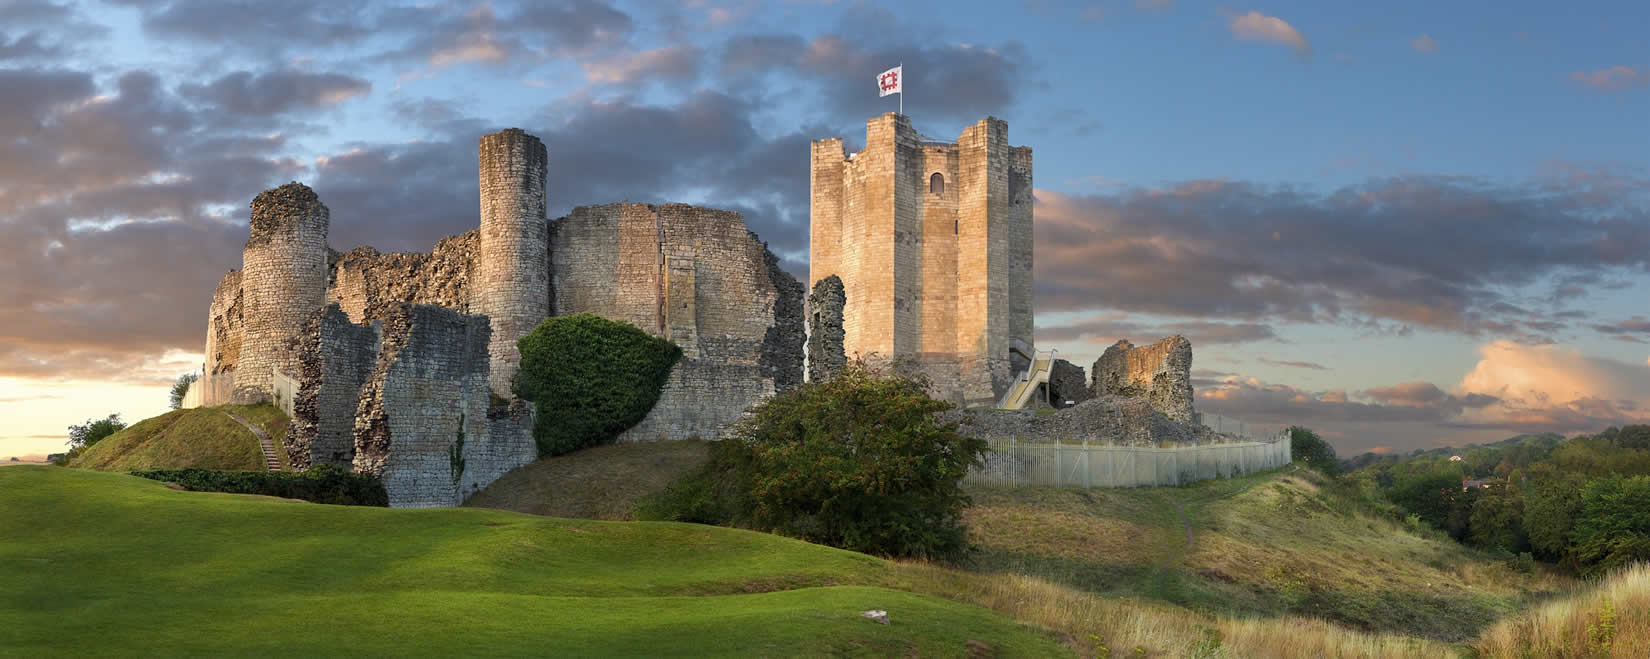 Image name Conisbrough Castle the 28 image from the post Visitor Attractions in Yorkshire.com.